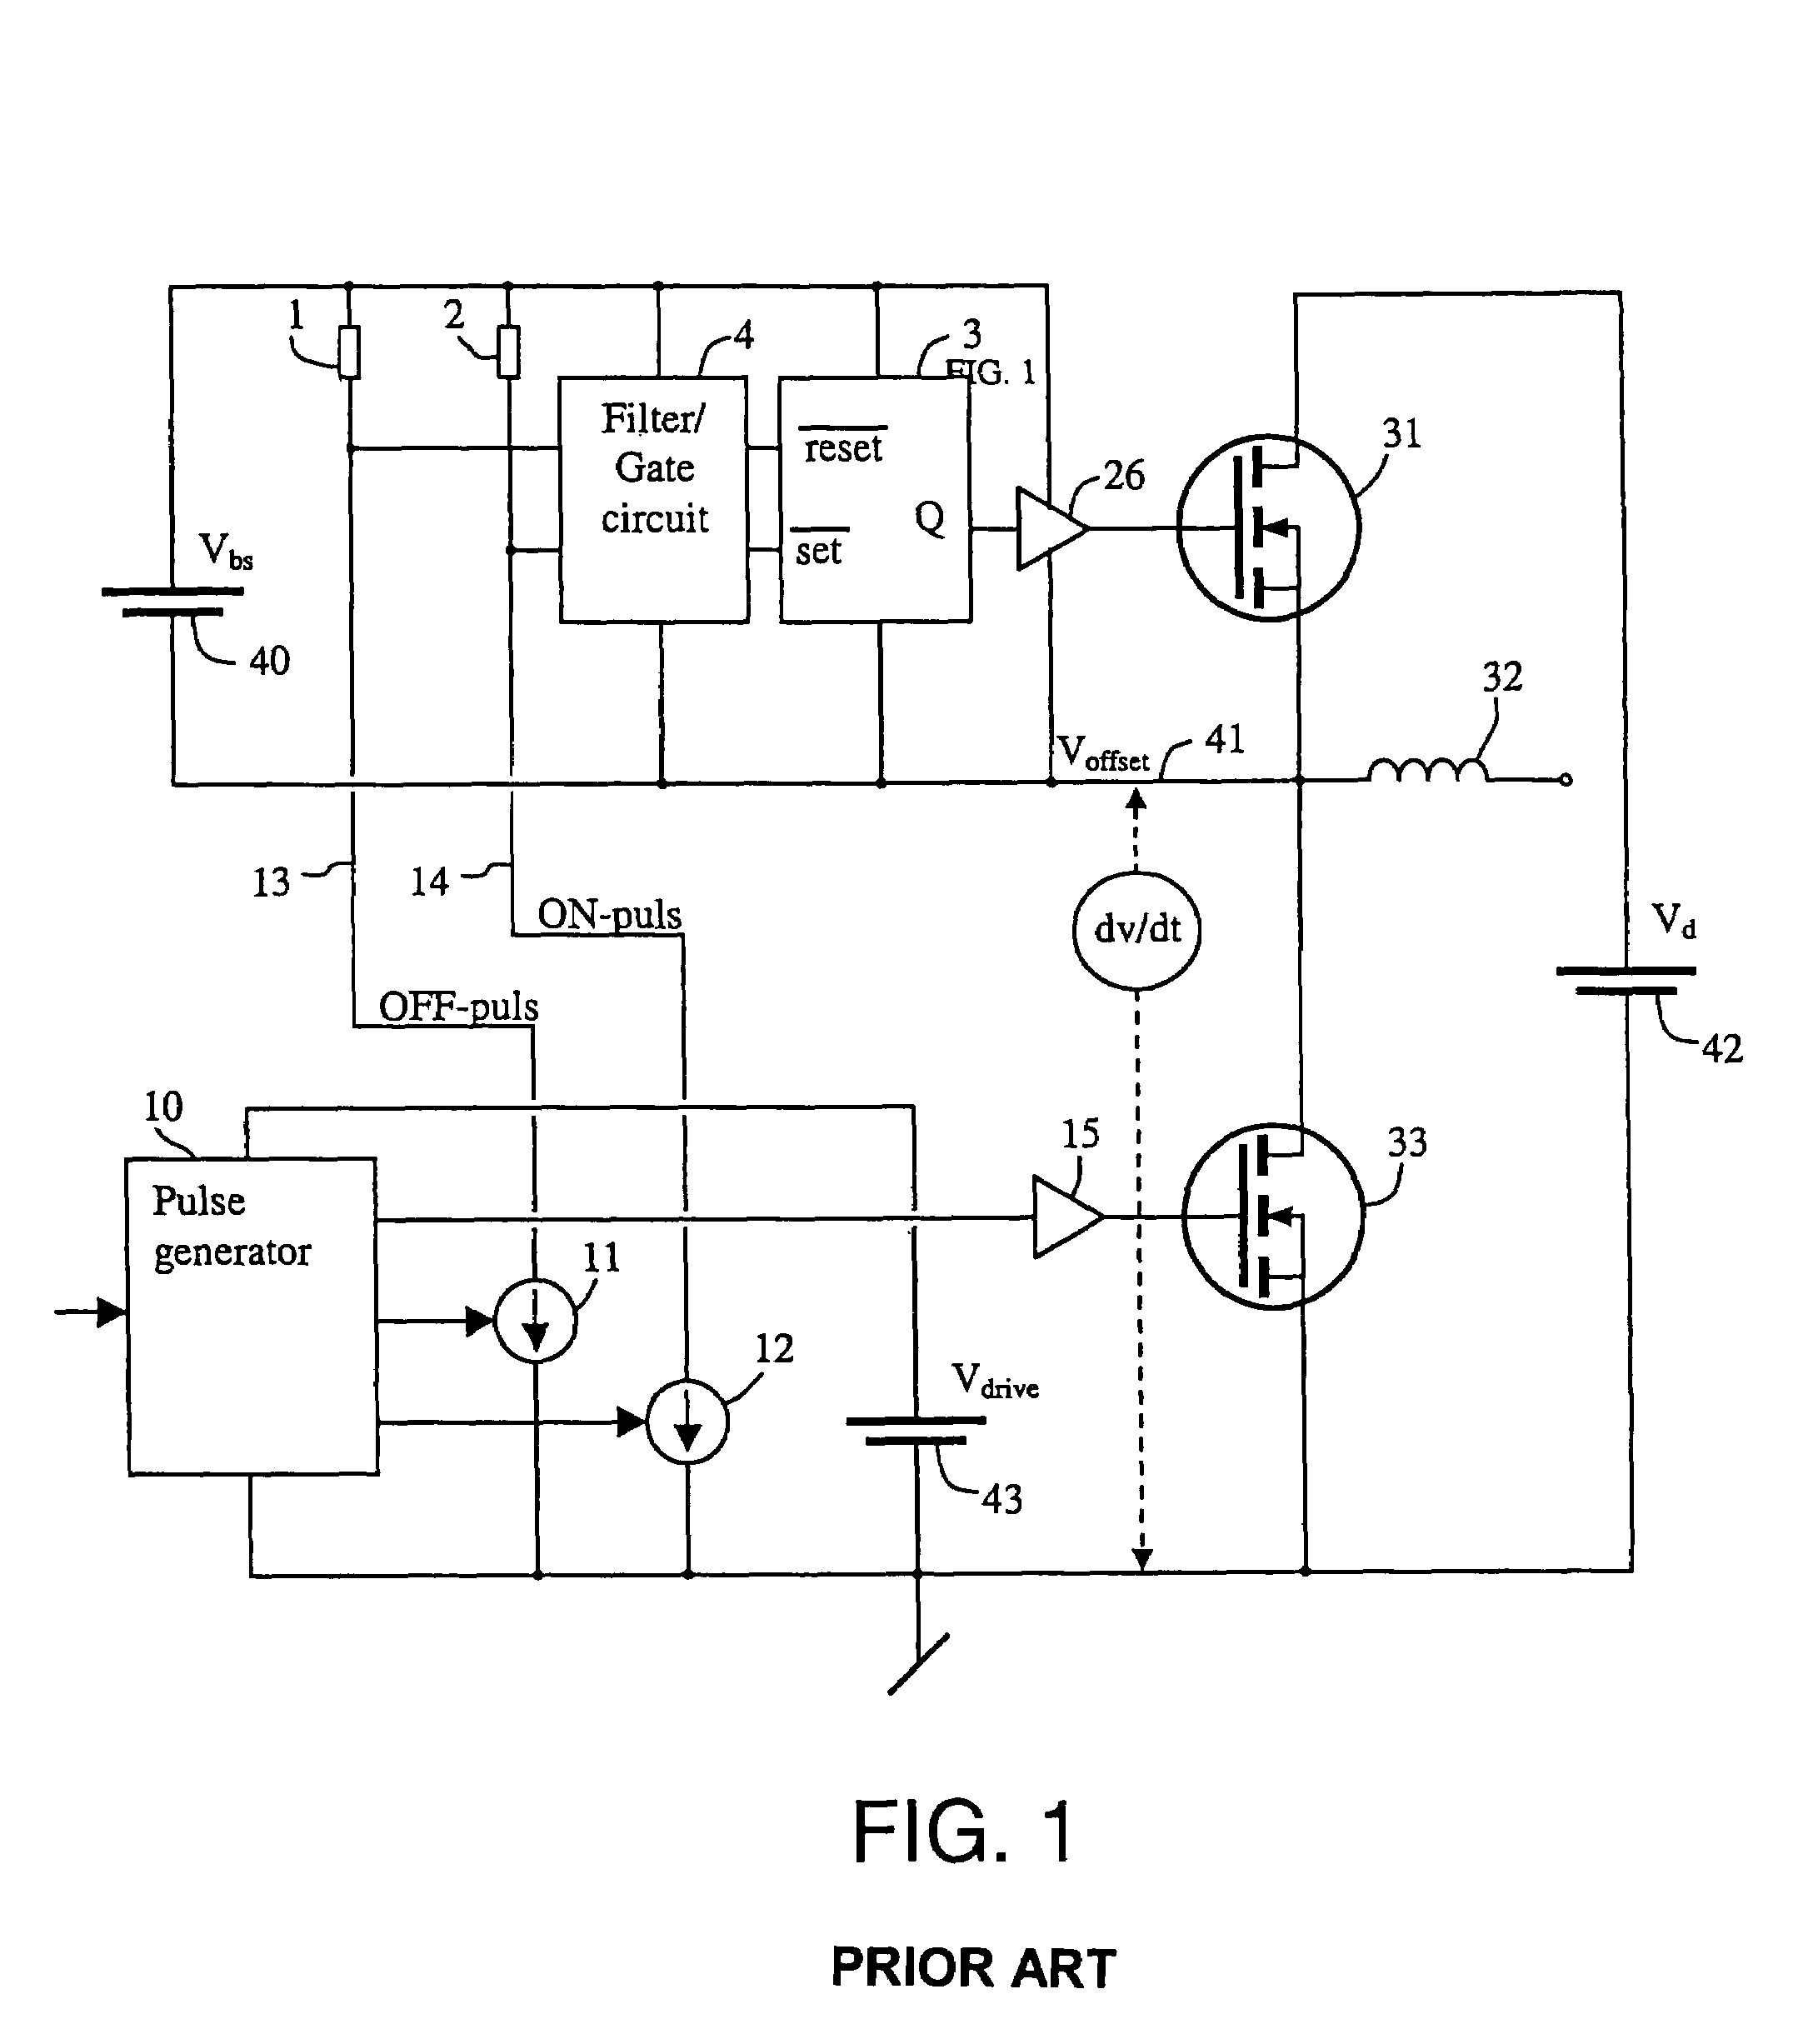 Half-bridge driver and power conversion system with such driver